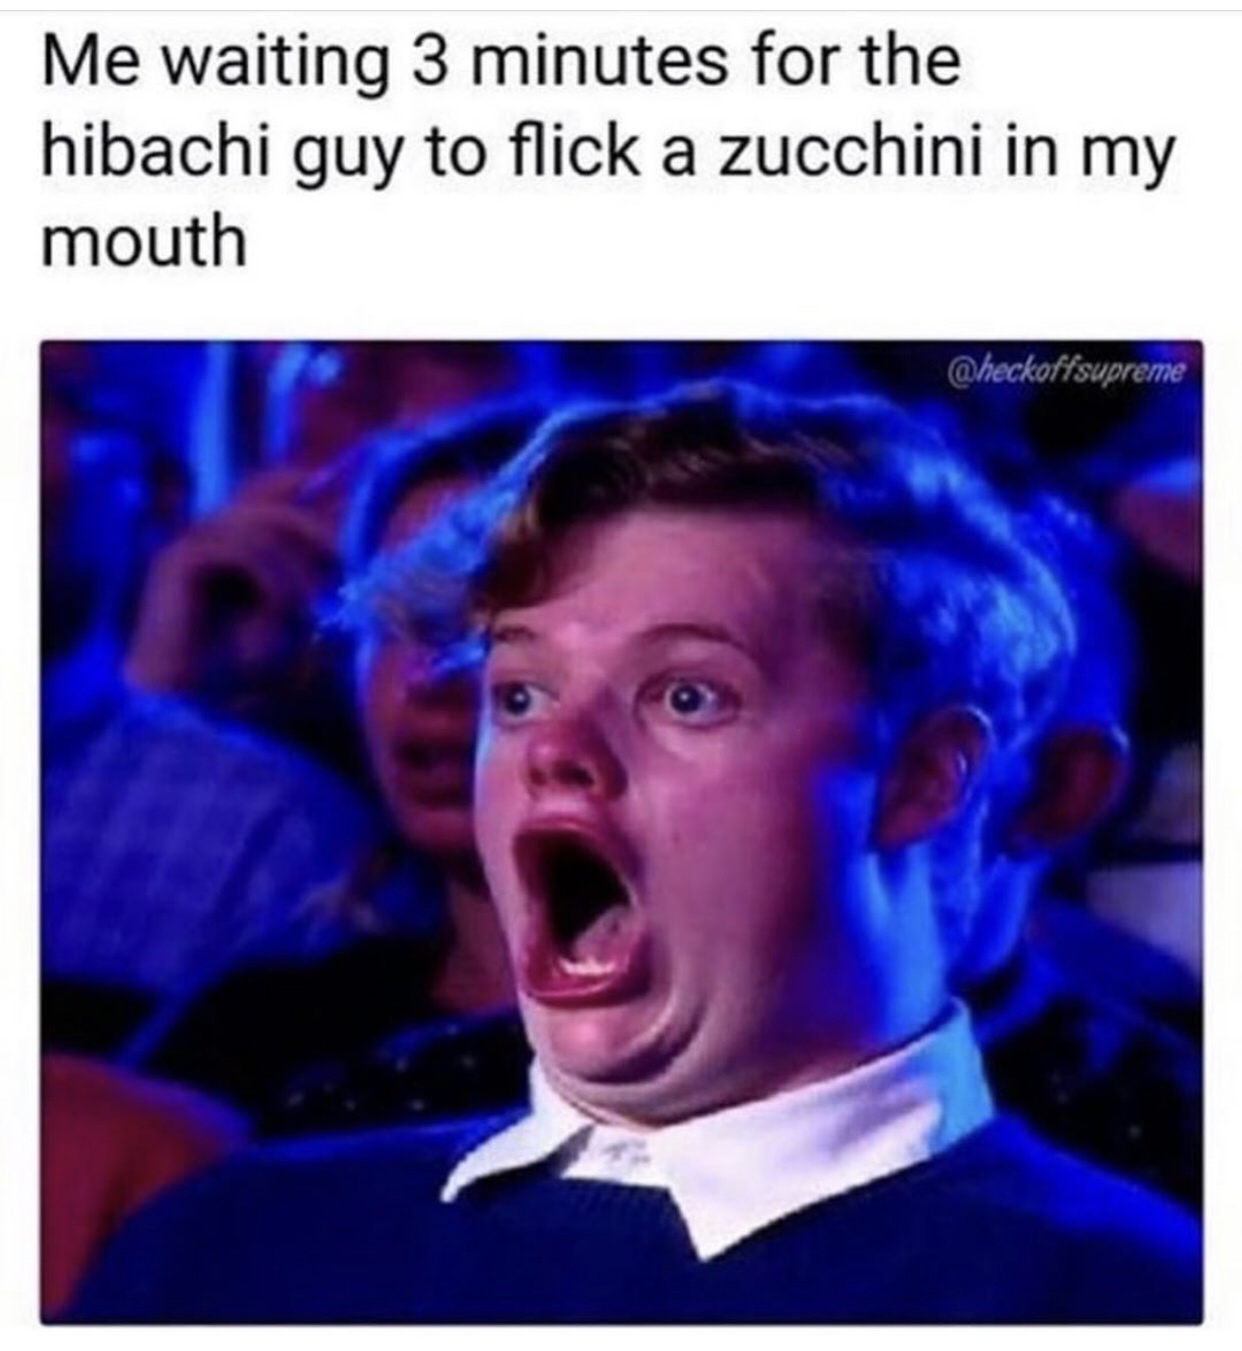 hibachi meme - Me waiting 3 minutes for the hibachi guy to flick a zucchini in my mouth